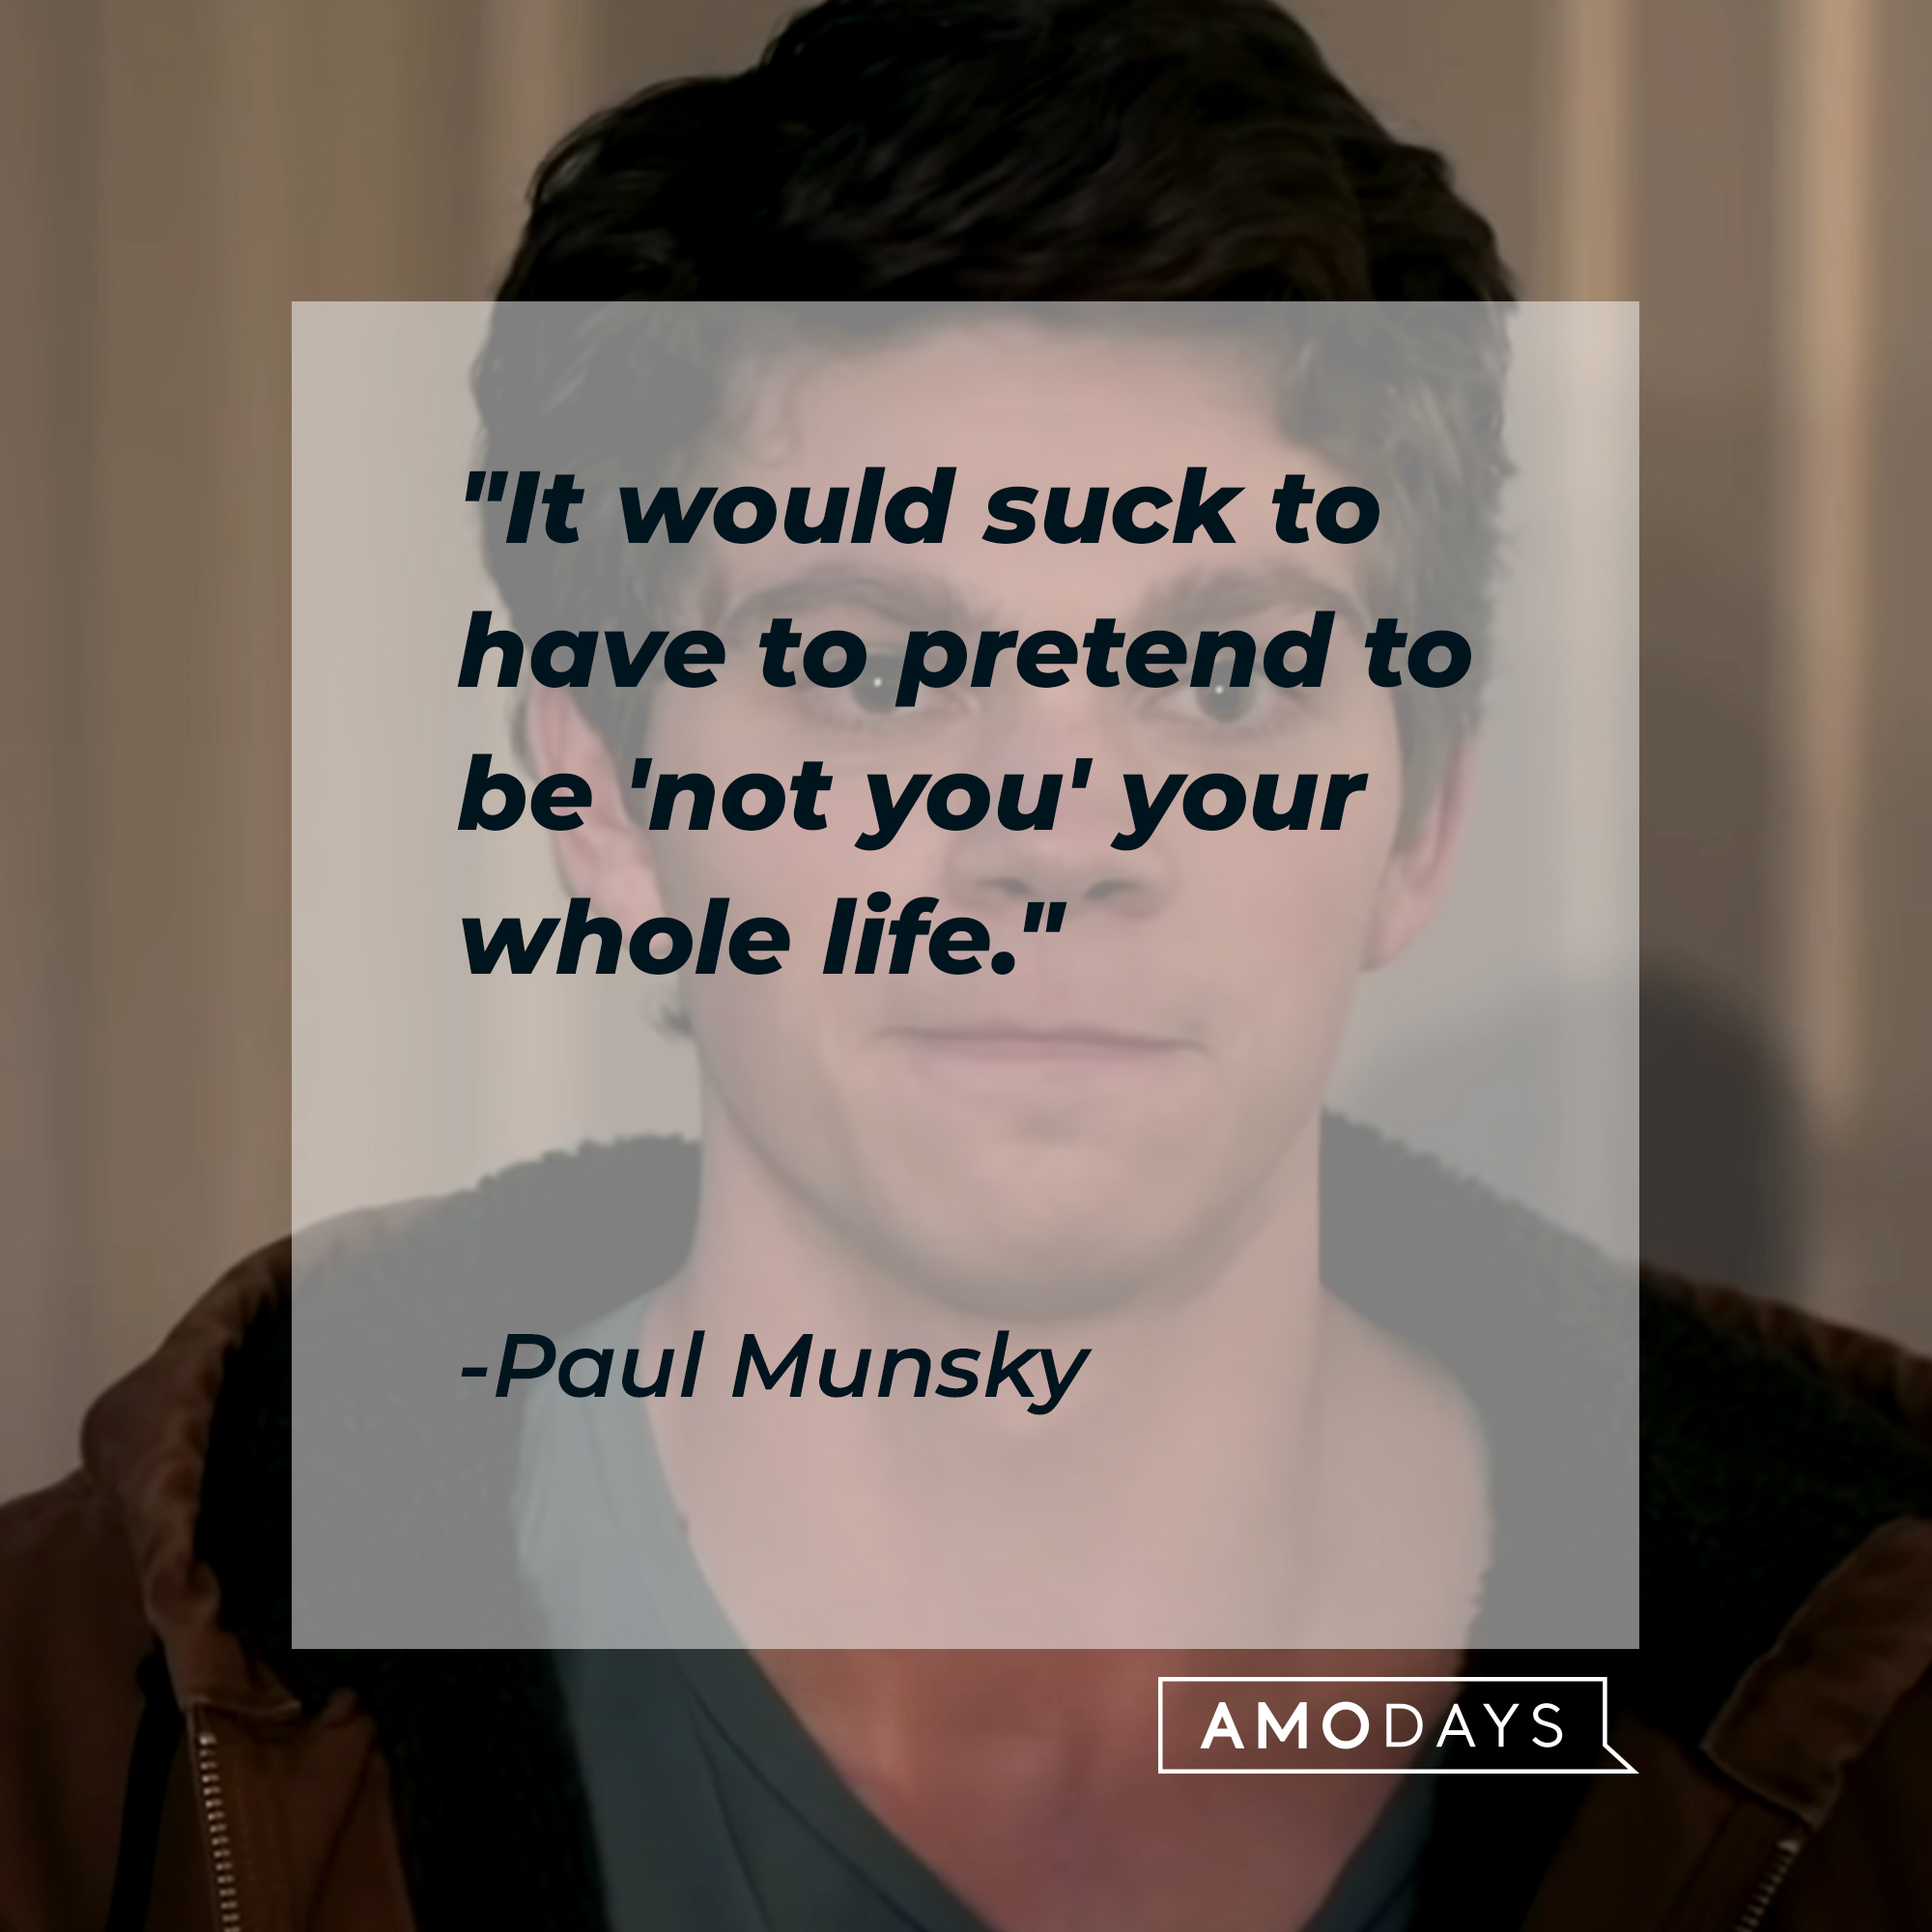 Paul Munsky's quote, "It would suck to have to pretend to be 'not you' your whole life." | Image: youtube.com/Netflix